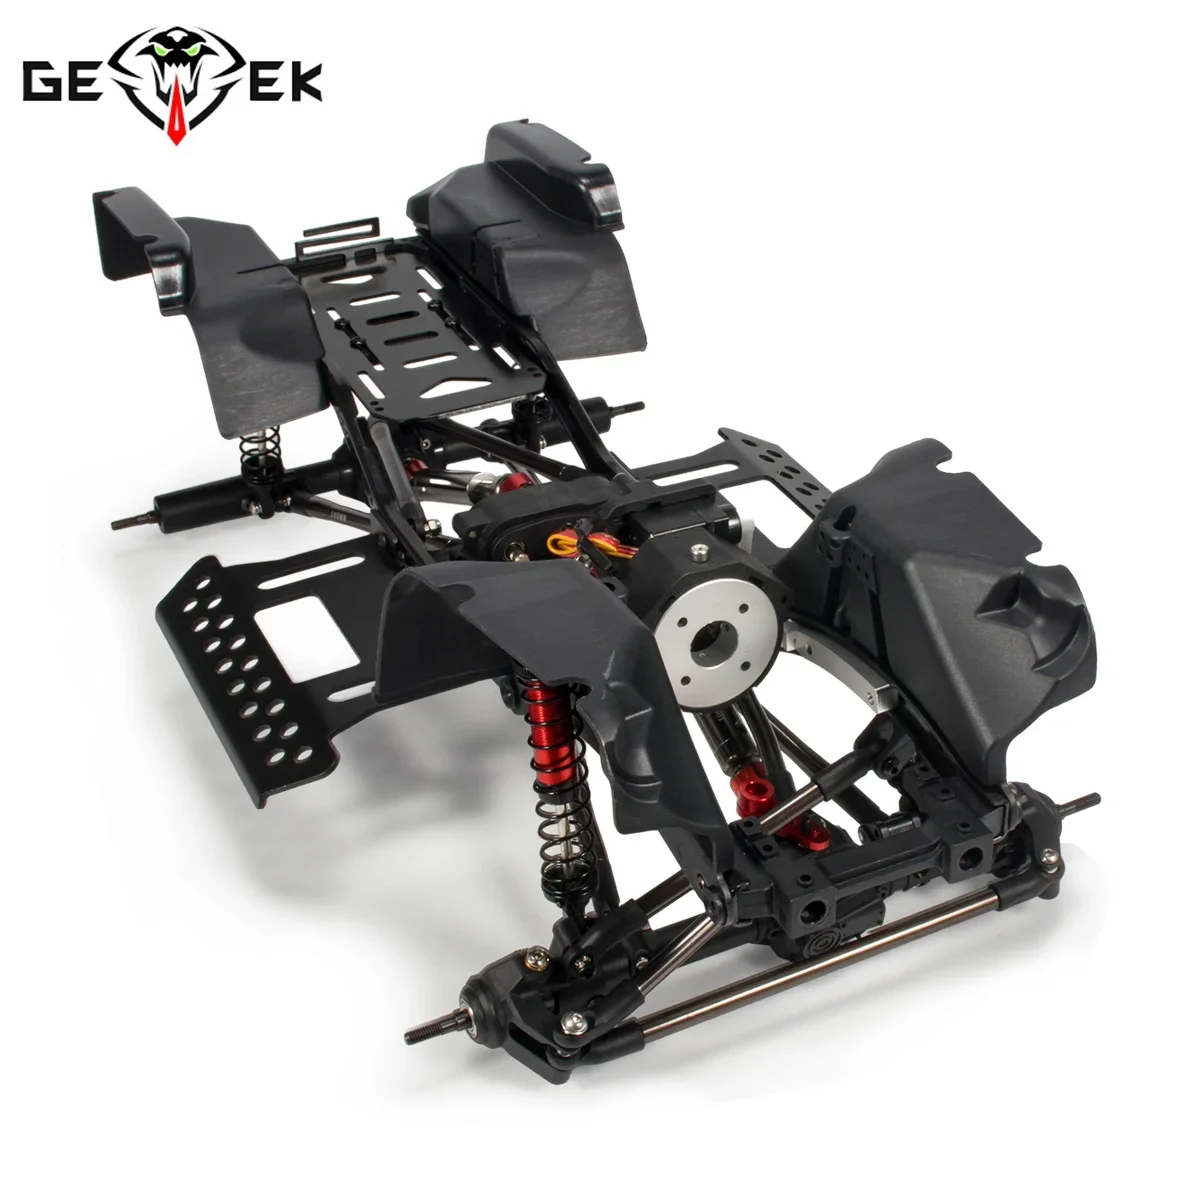 1-10-RC-Crawler-Chassis-Kit-with-Planetary-Gear-2-Speed-Transmission ...